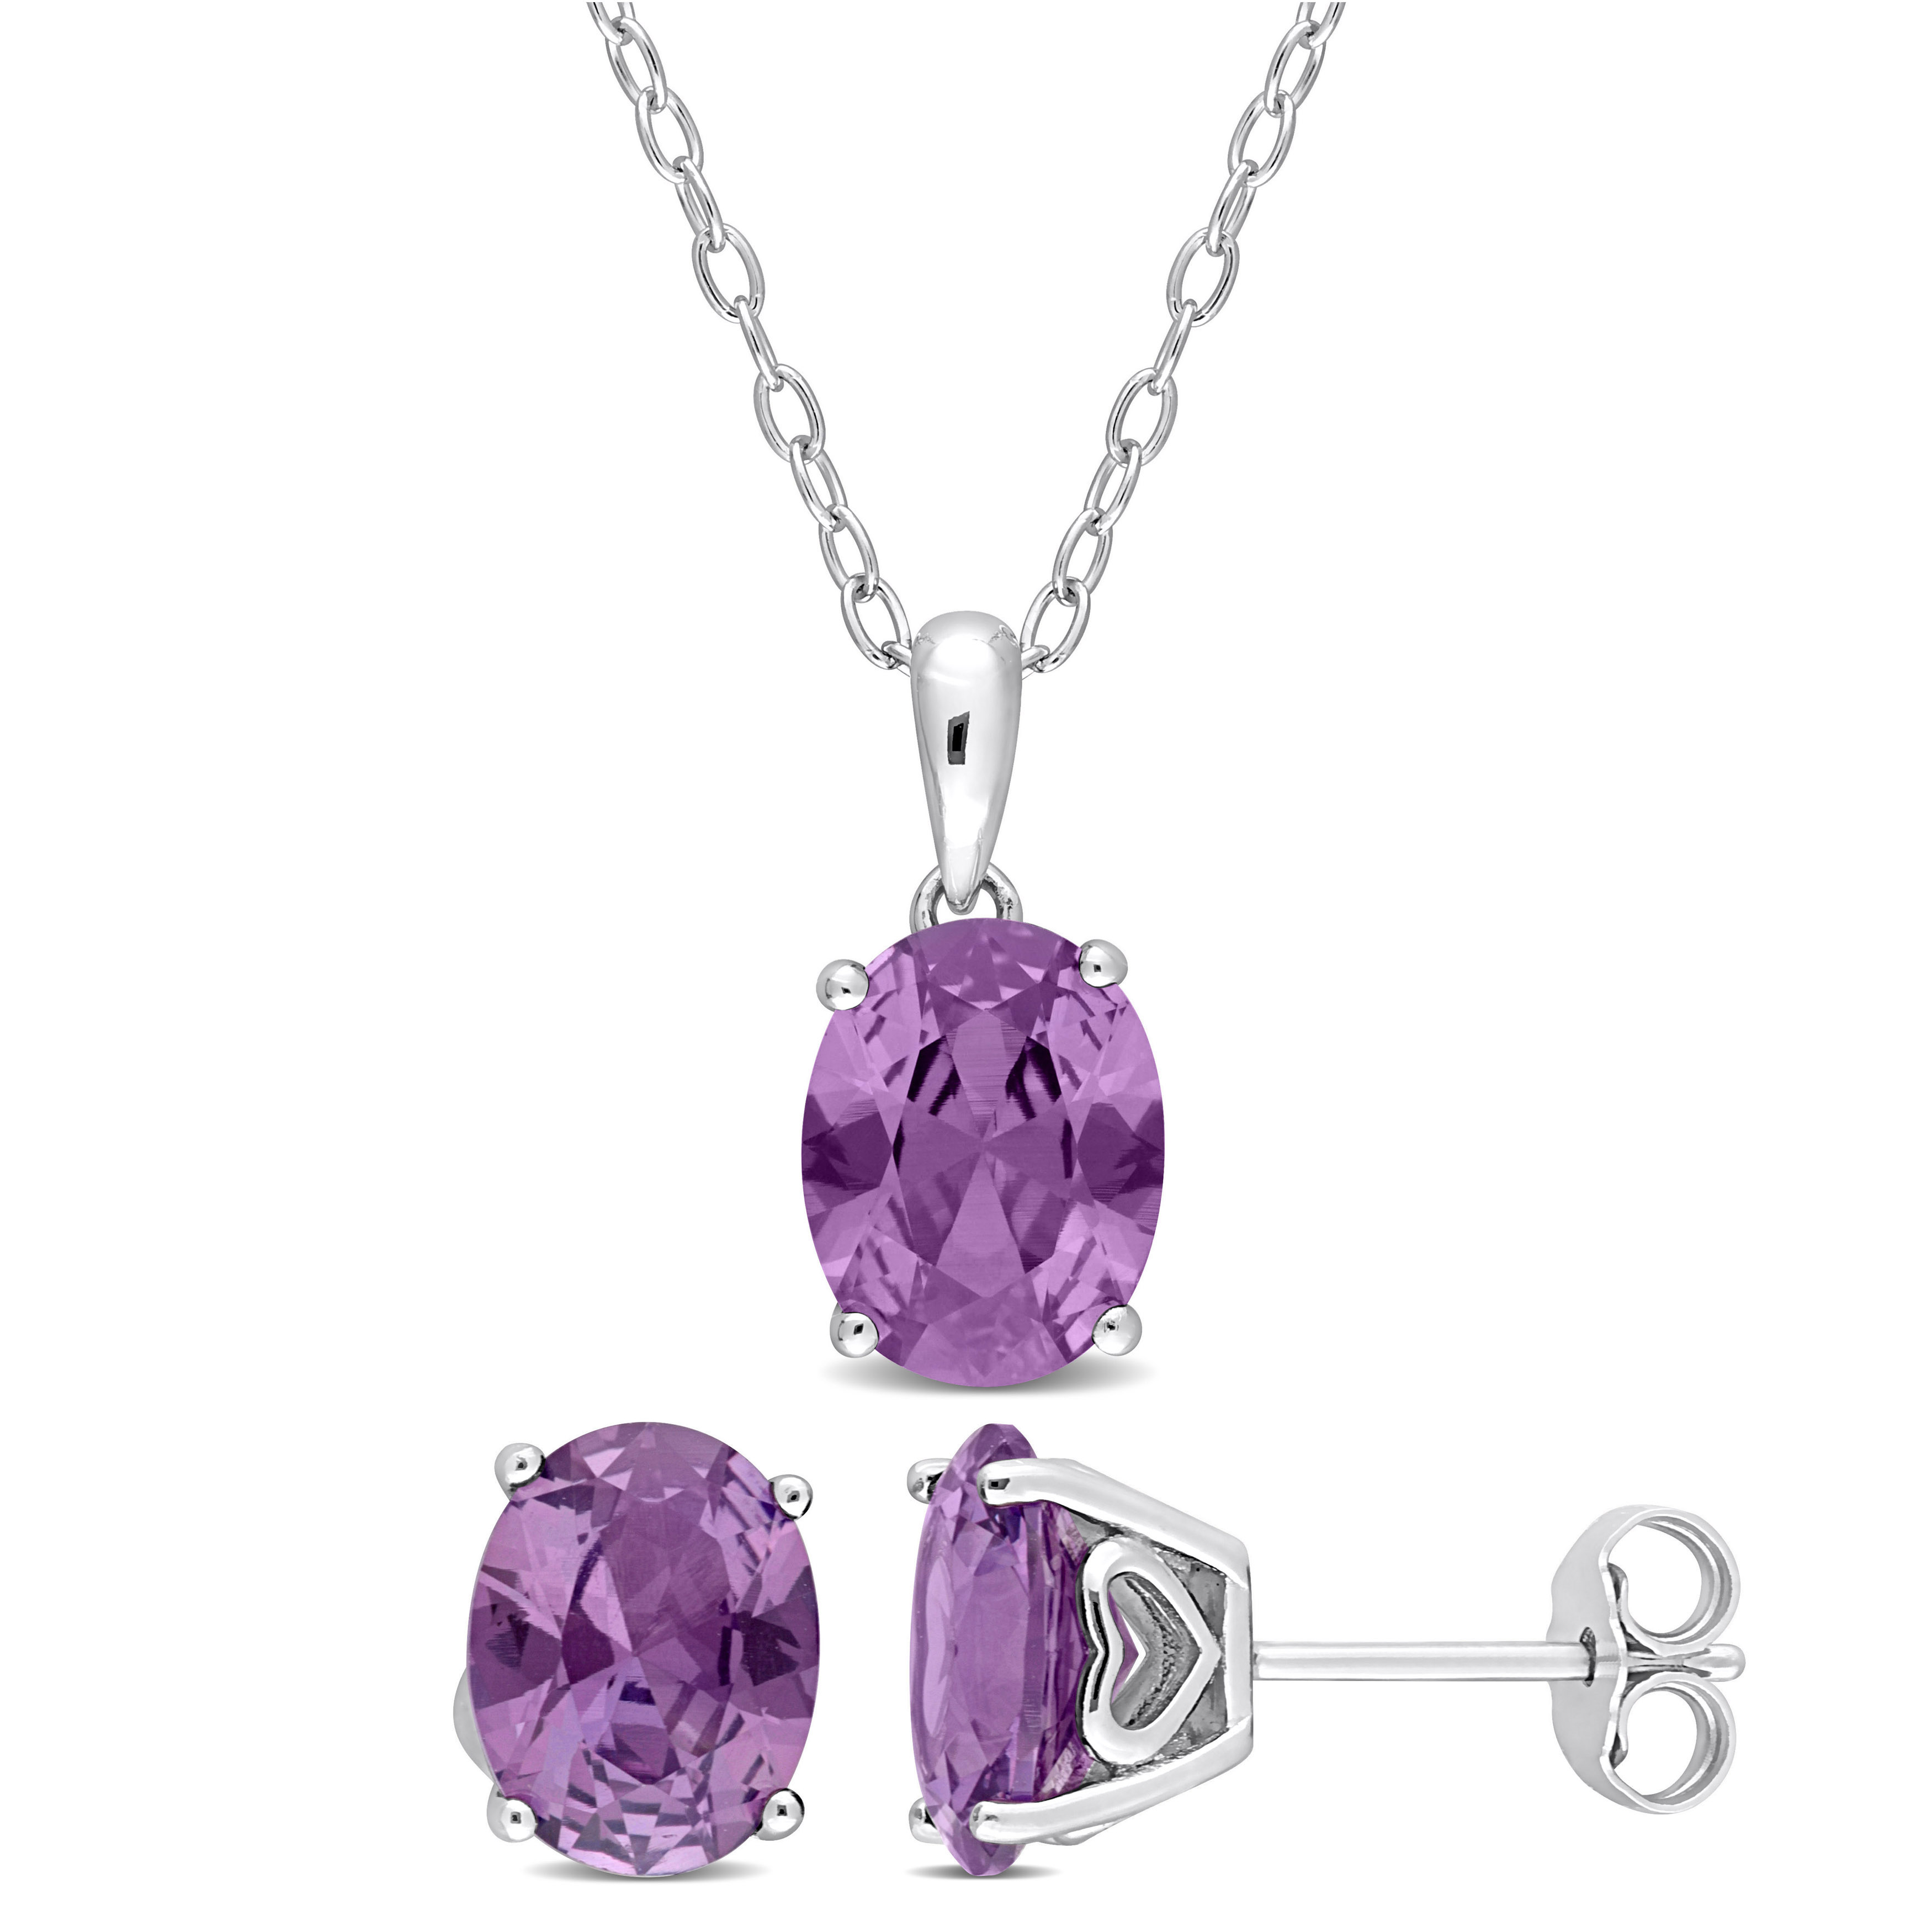 7 1/2 CT TGW Oval Simulated Alexandrite 2-Piece Set of Pendant with Chain and Earrings in Sterling Silver